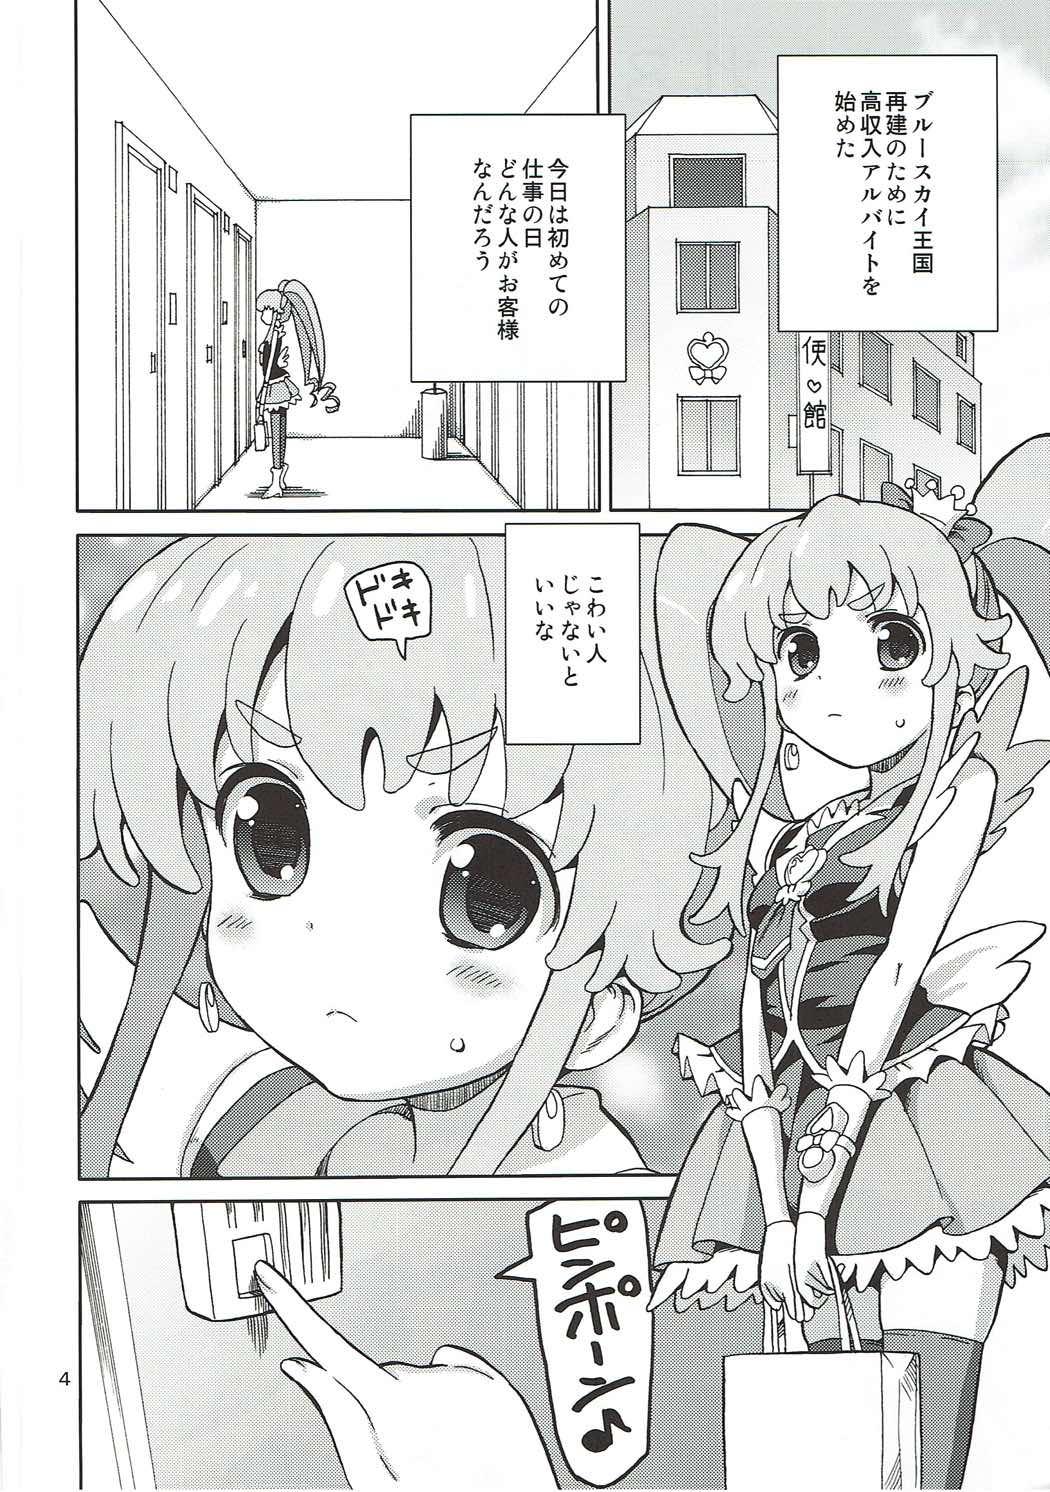 Holes PreAre 8 - Happinesscharge precure Skinny - Page 3